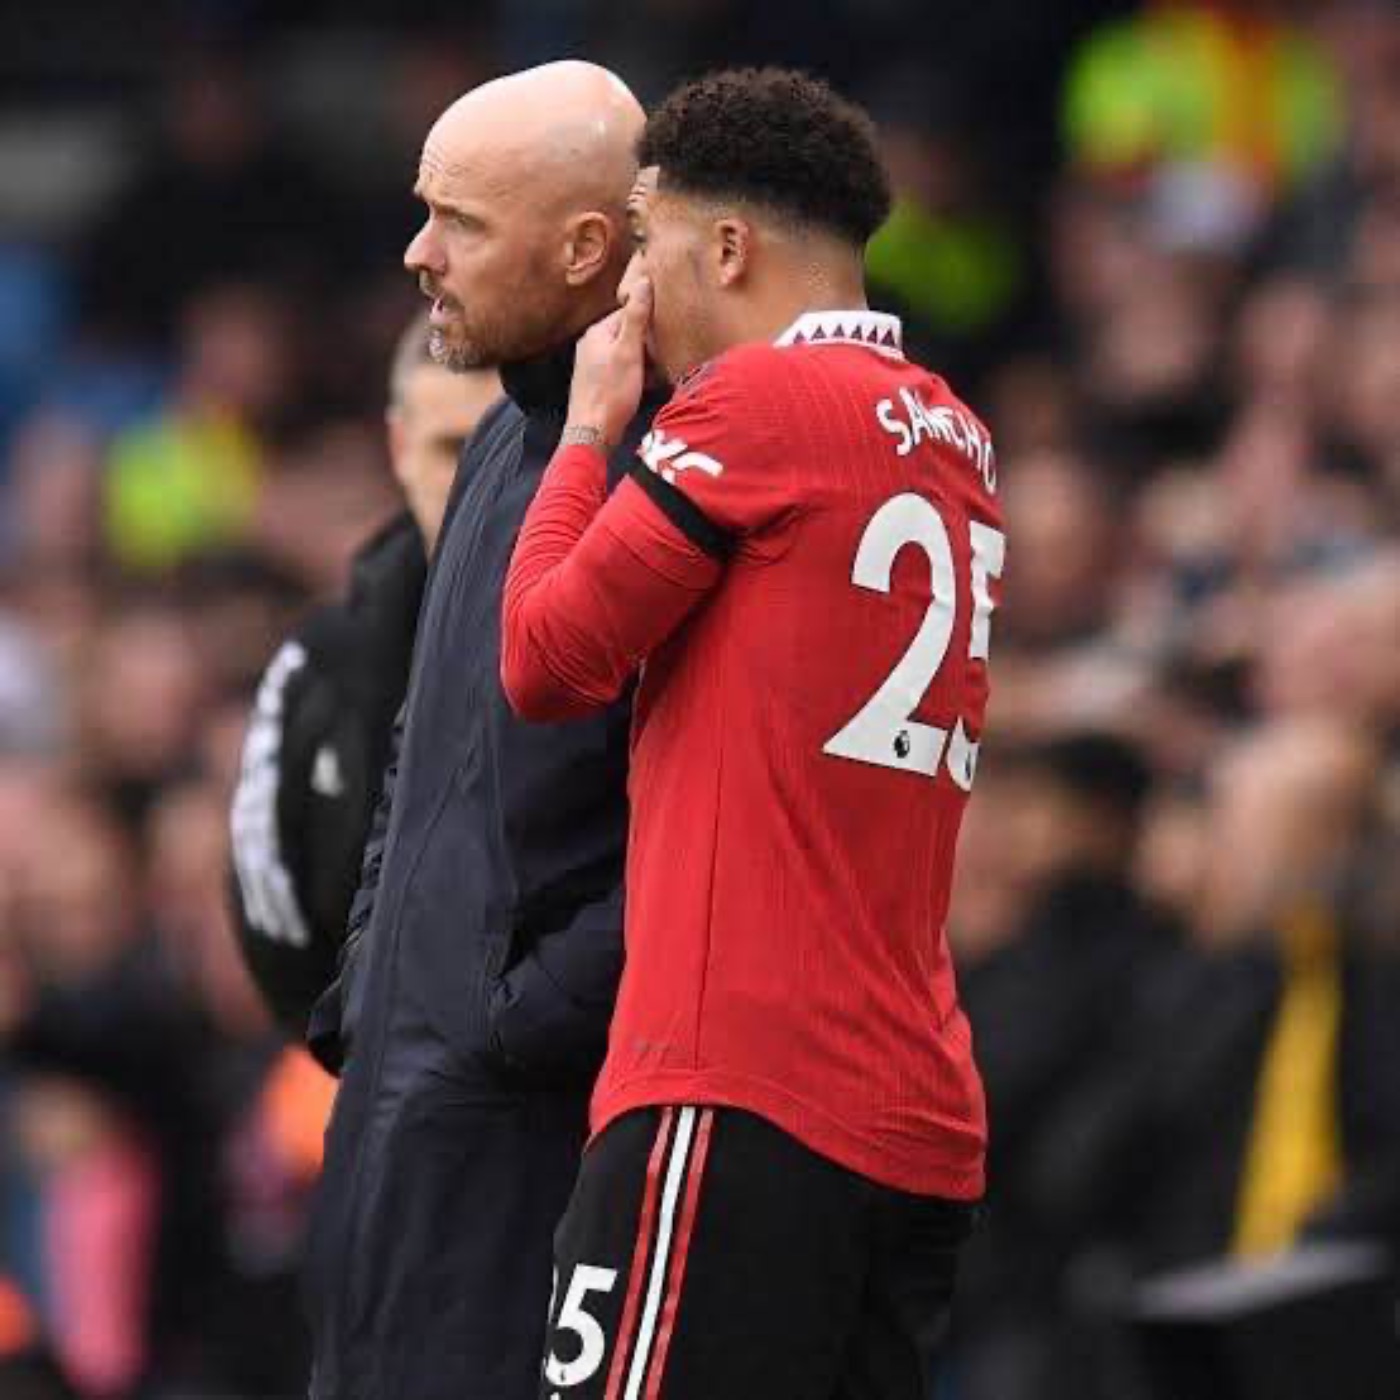 MANCHESTER UNITED : Transfers, Ten Hag, Sancho, predictions, and a lot more